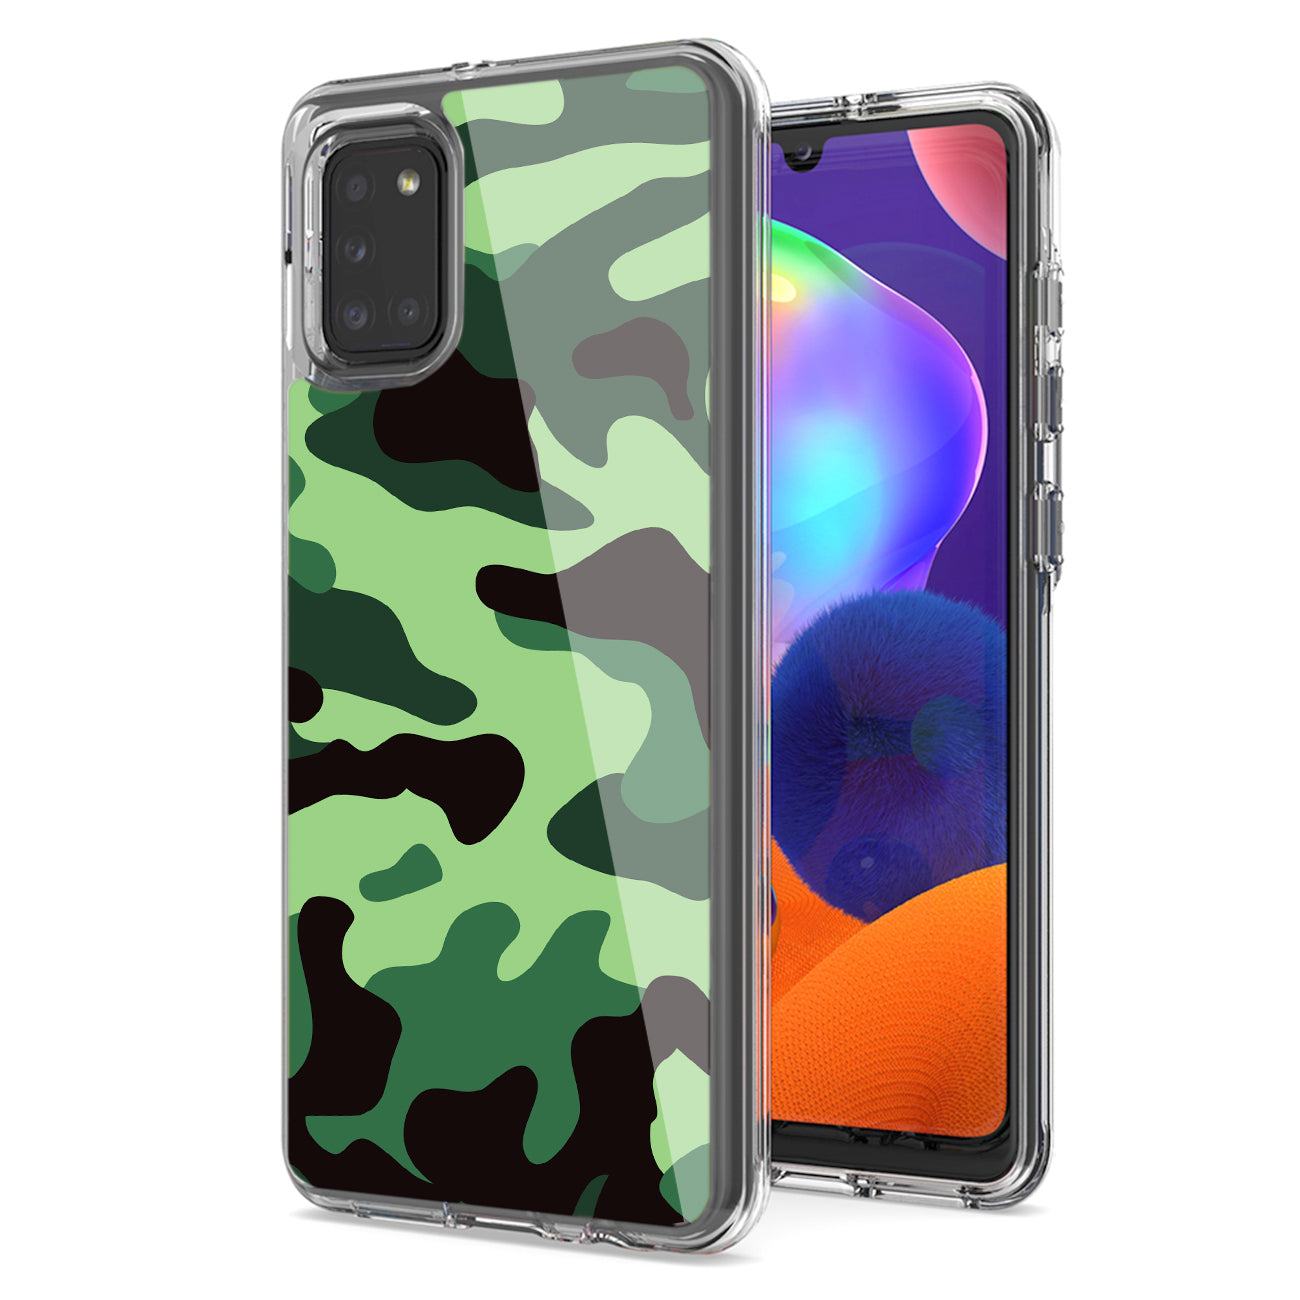 Camouflage Dual Layer Hybrid Hard & Soft TPU Rubber Case for SAMS GALAXY A31 In Mint Green